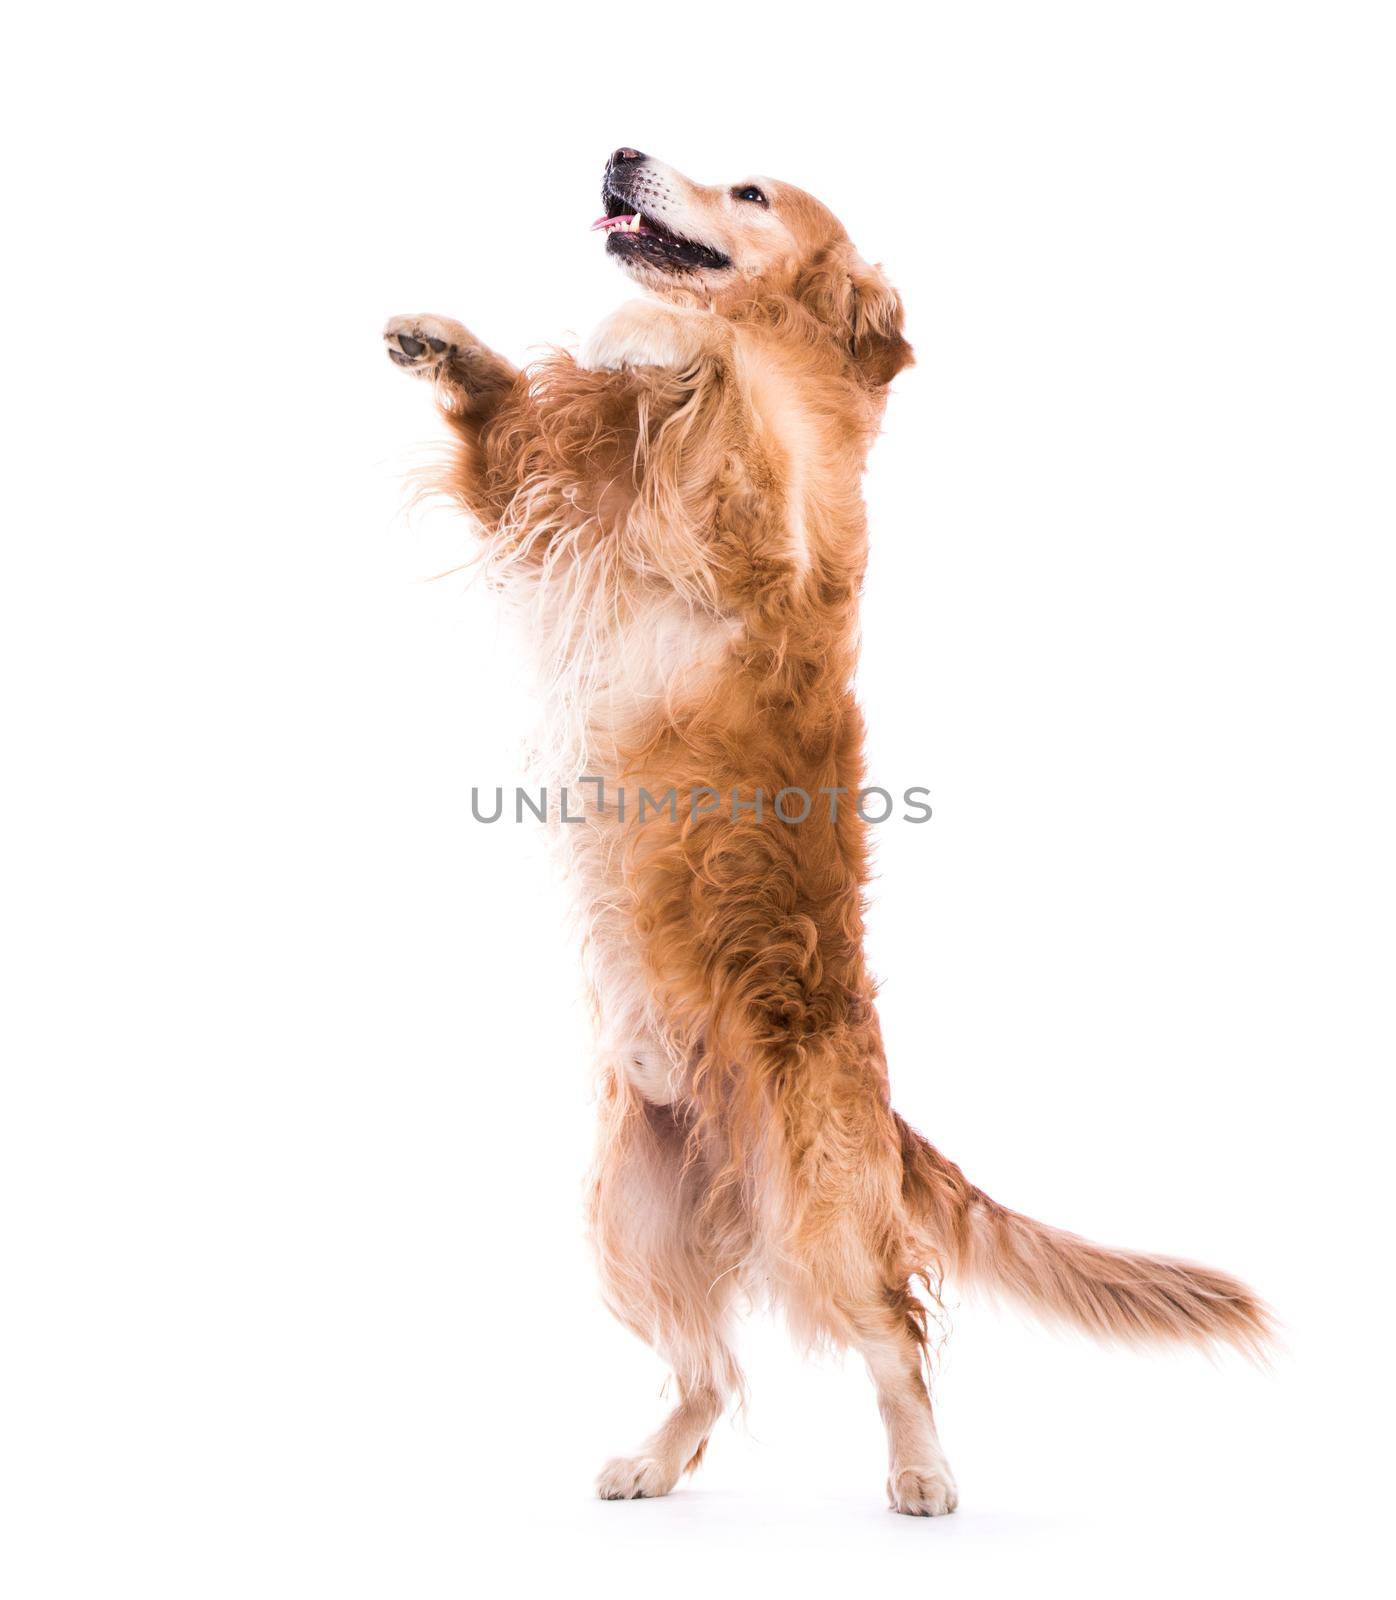 Cute dog jumping - over a white backgorund by tan4ikk1